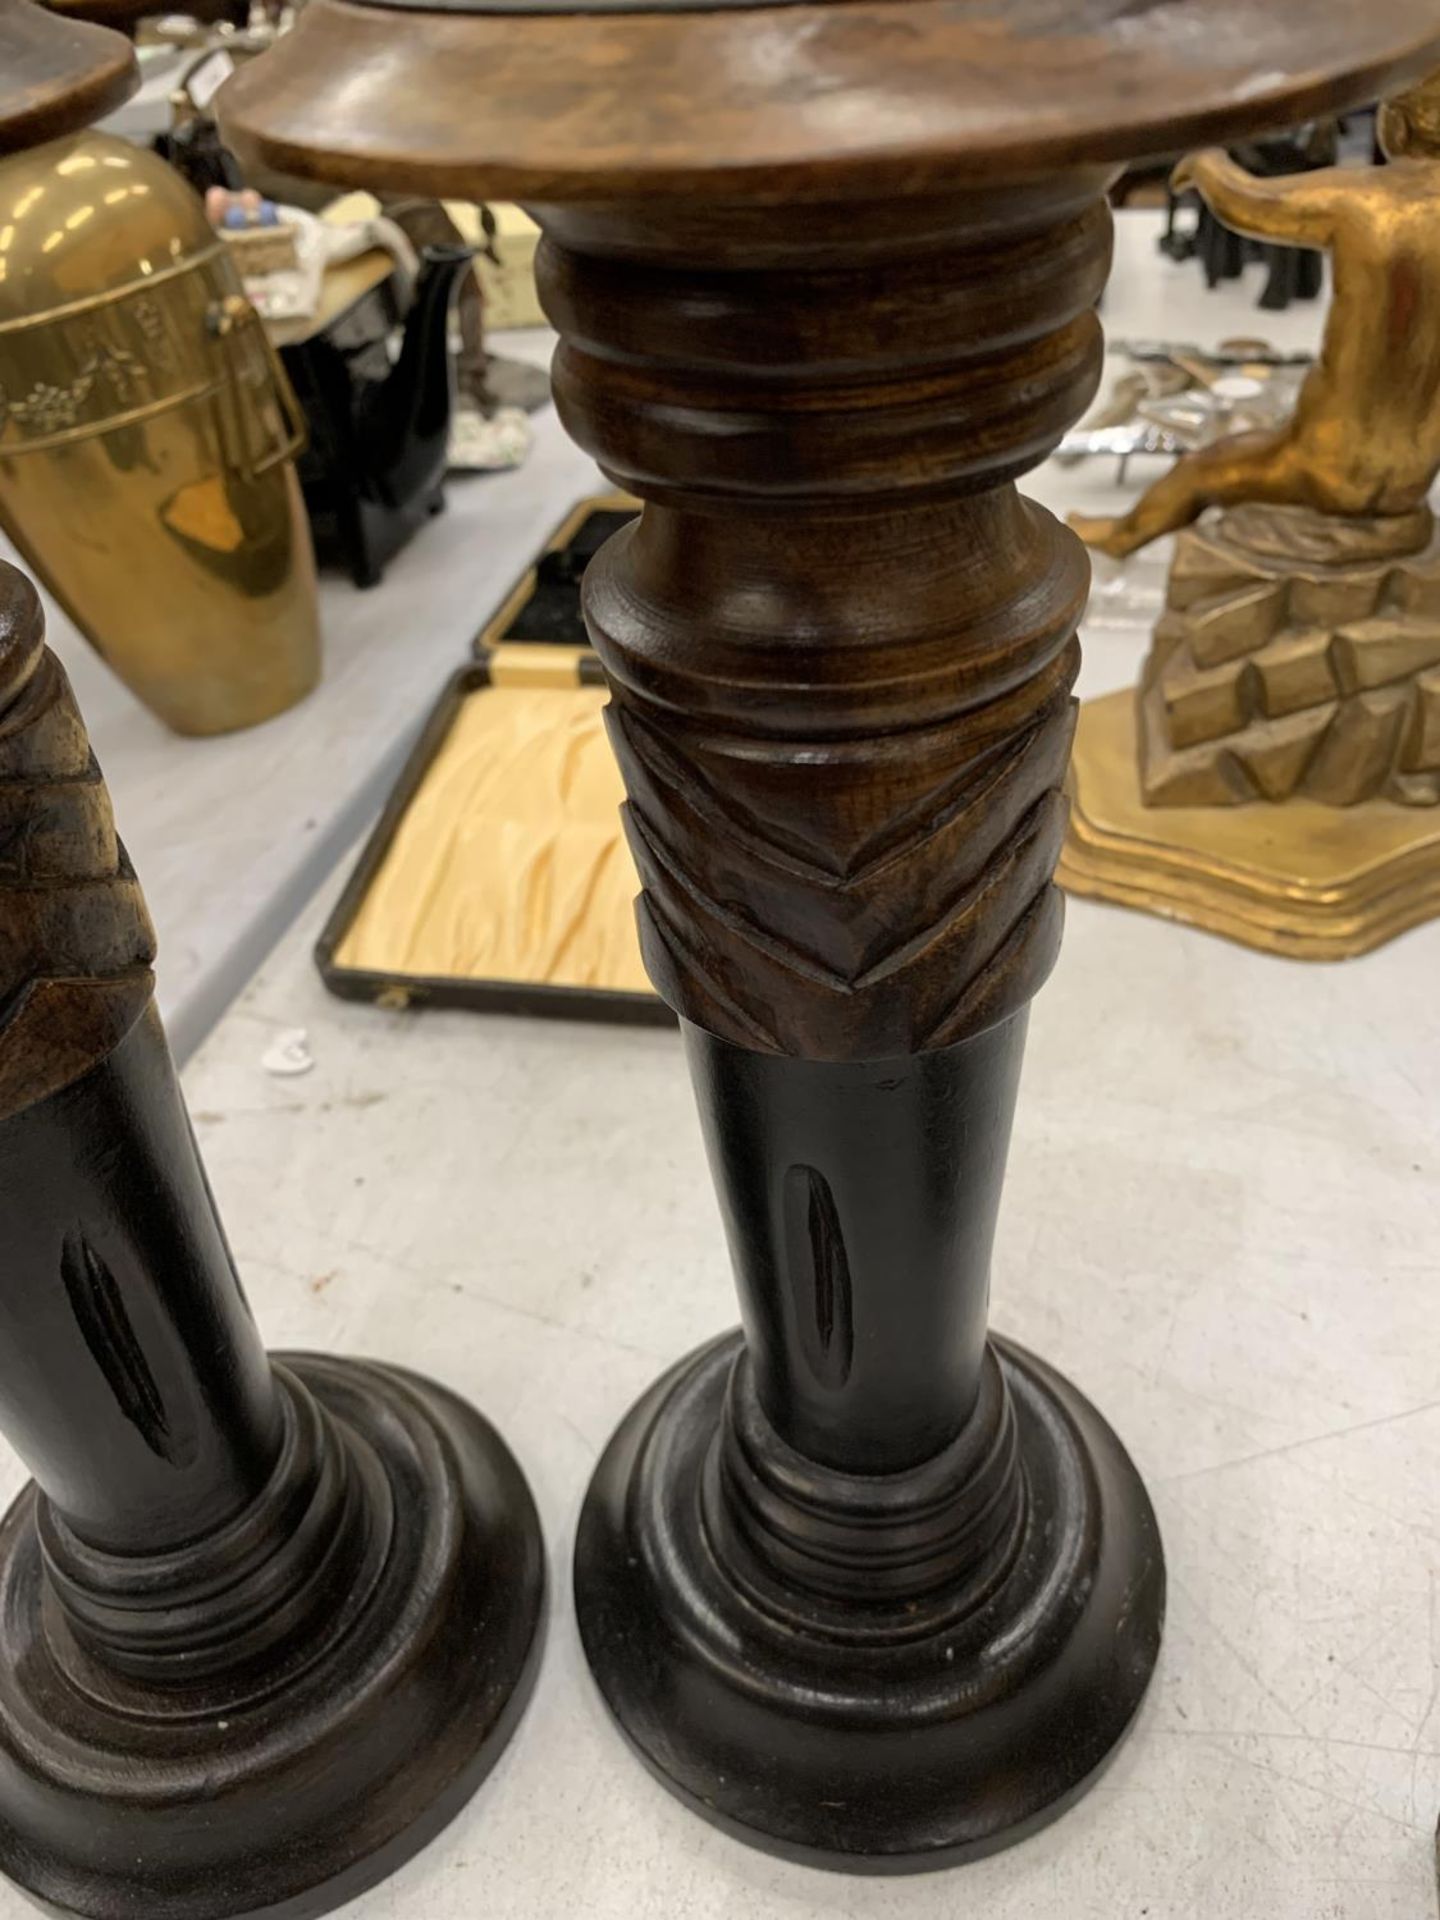 A PAIR OF VINTAGE WOODEN CANDLESTICKS - Image 2 of 3